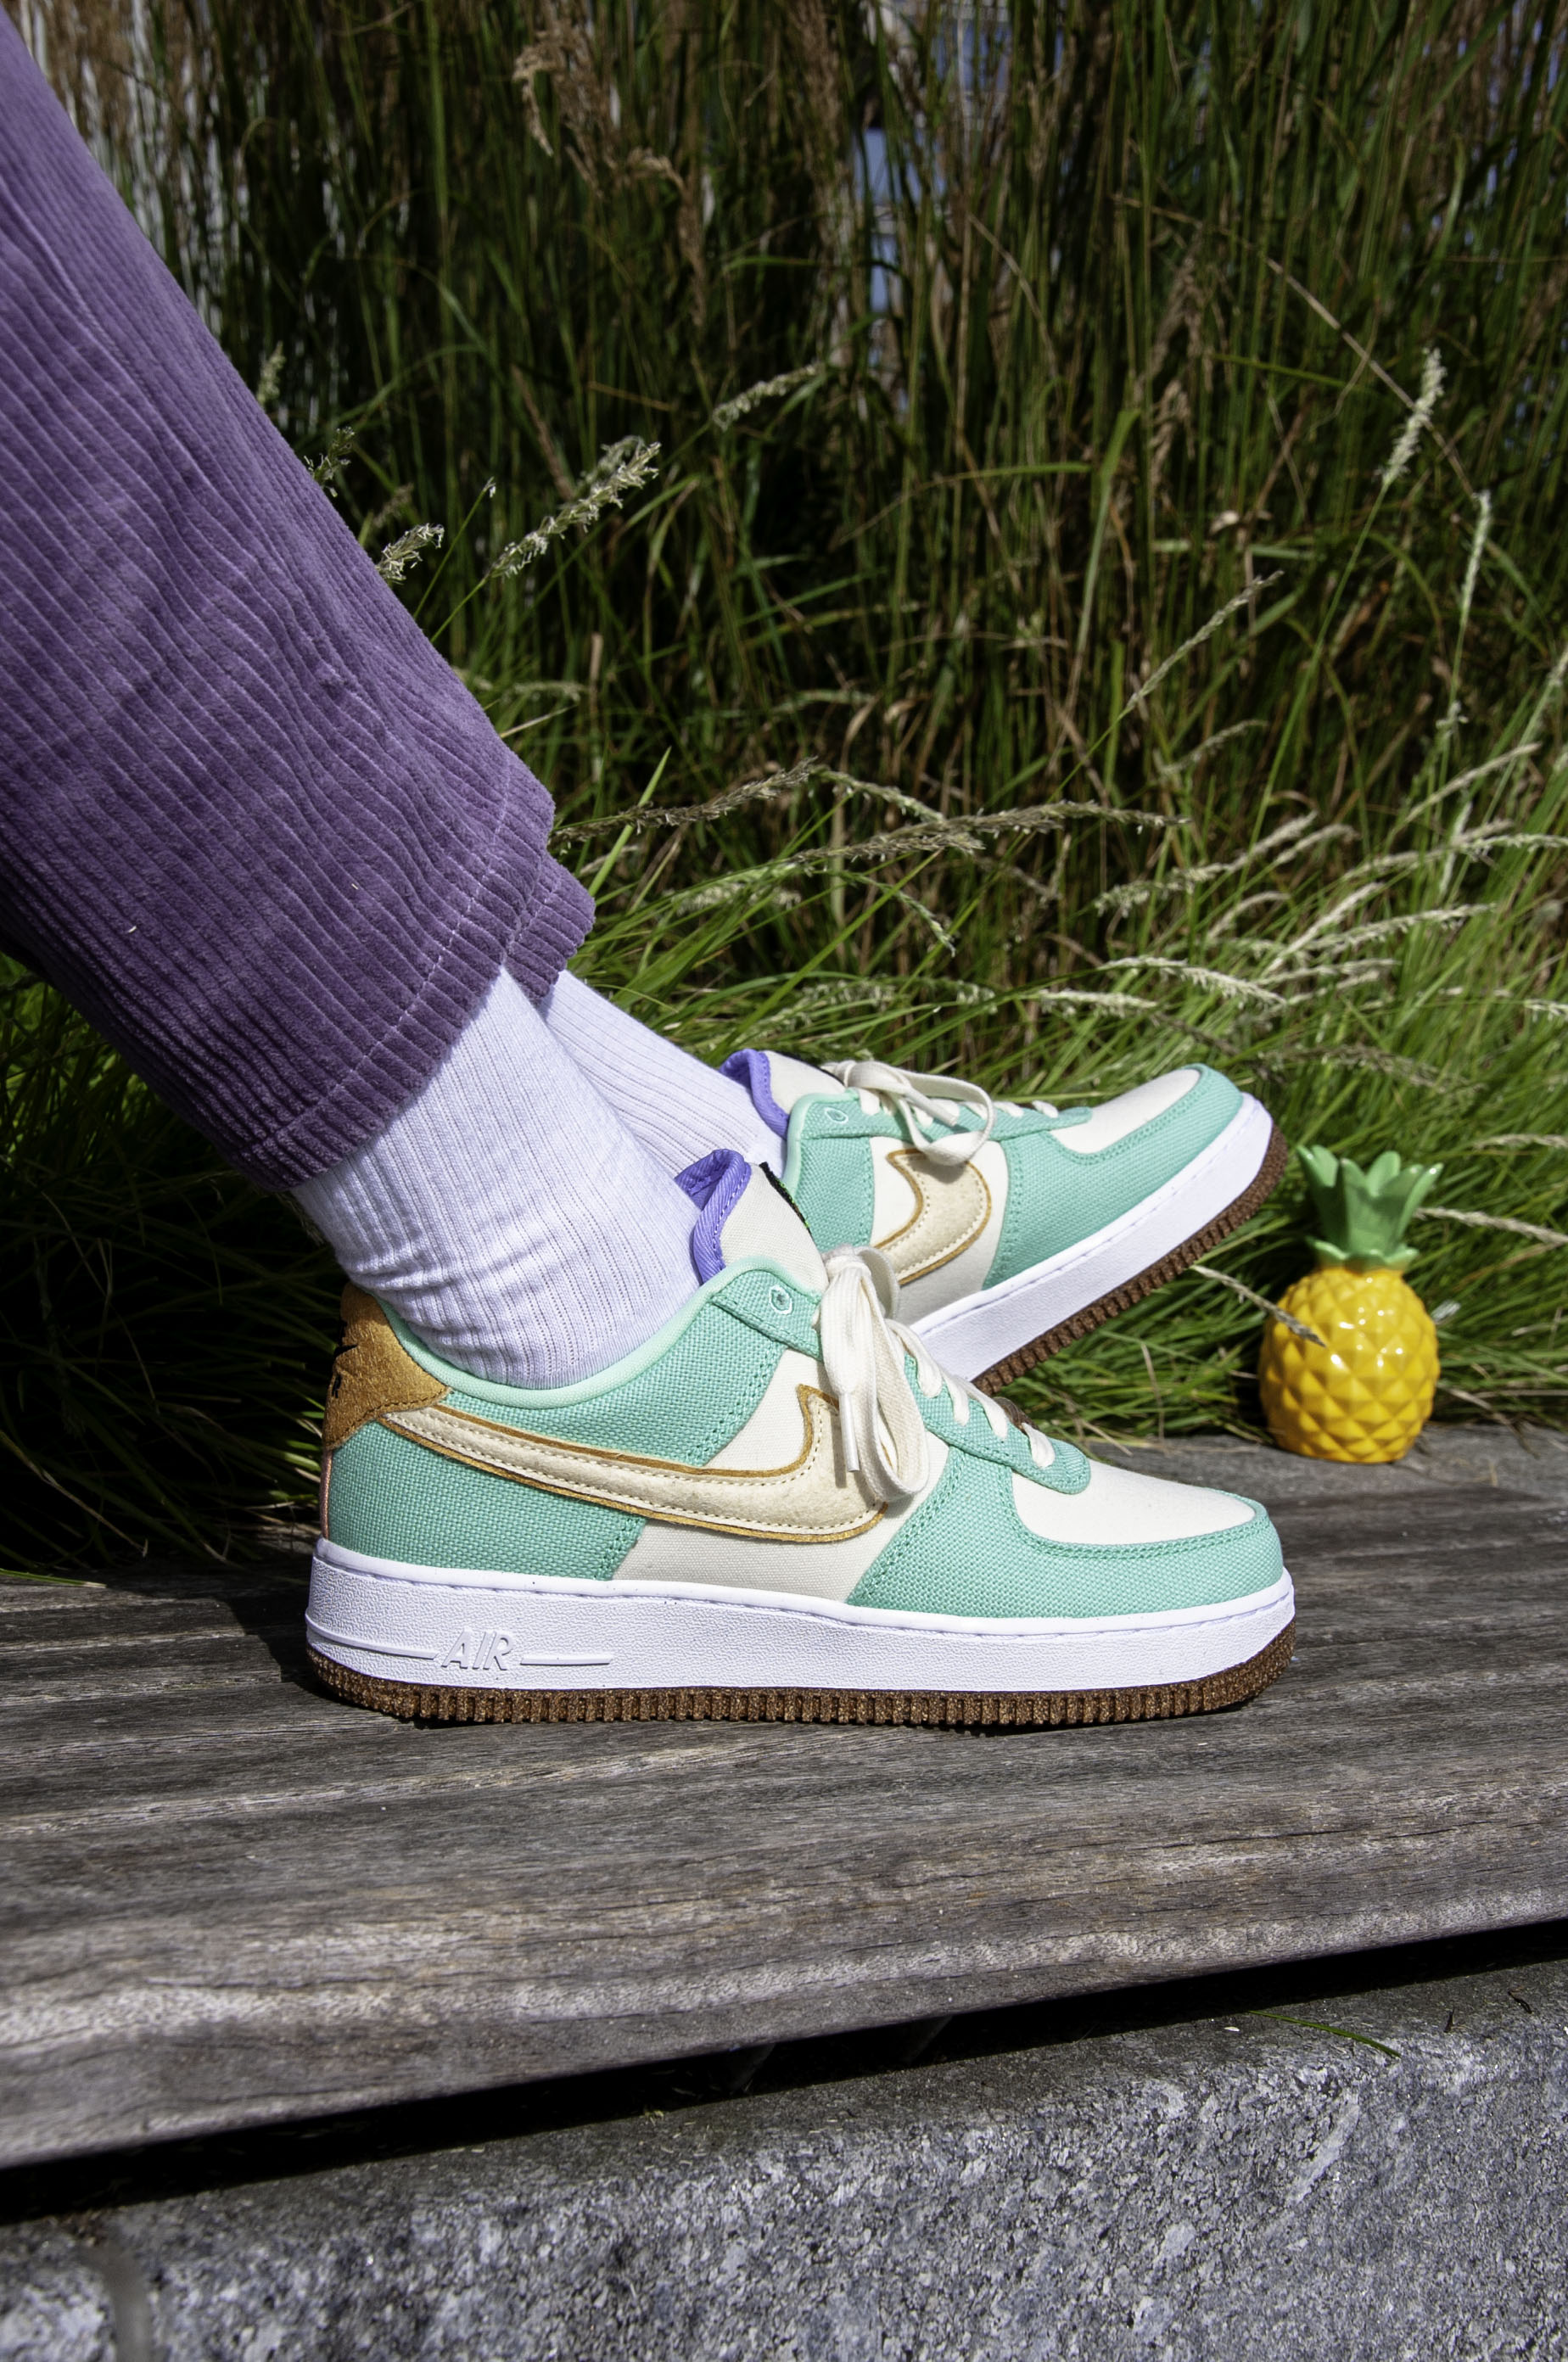 Nike Air Force 1 Low "Happy Pineapple" CZ0268-300